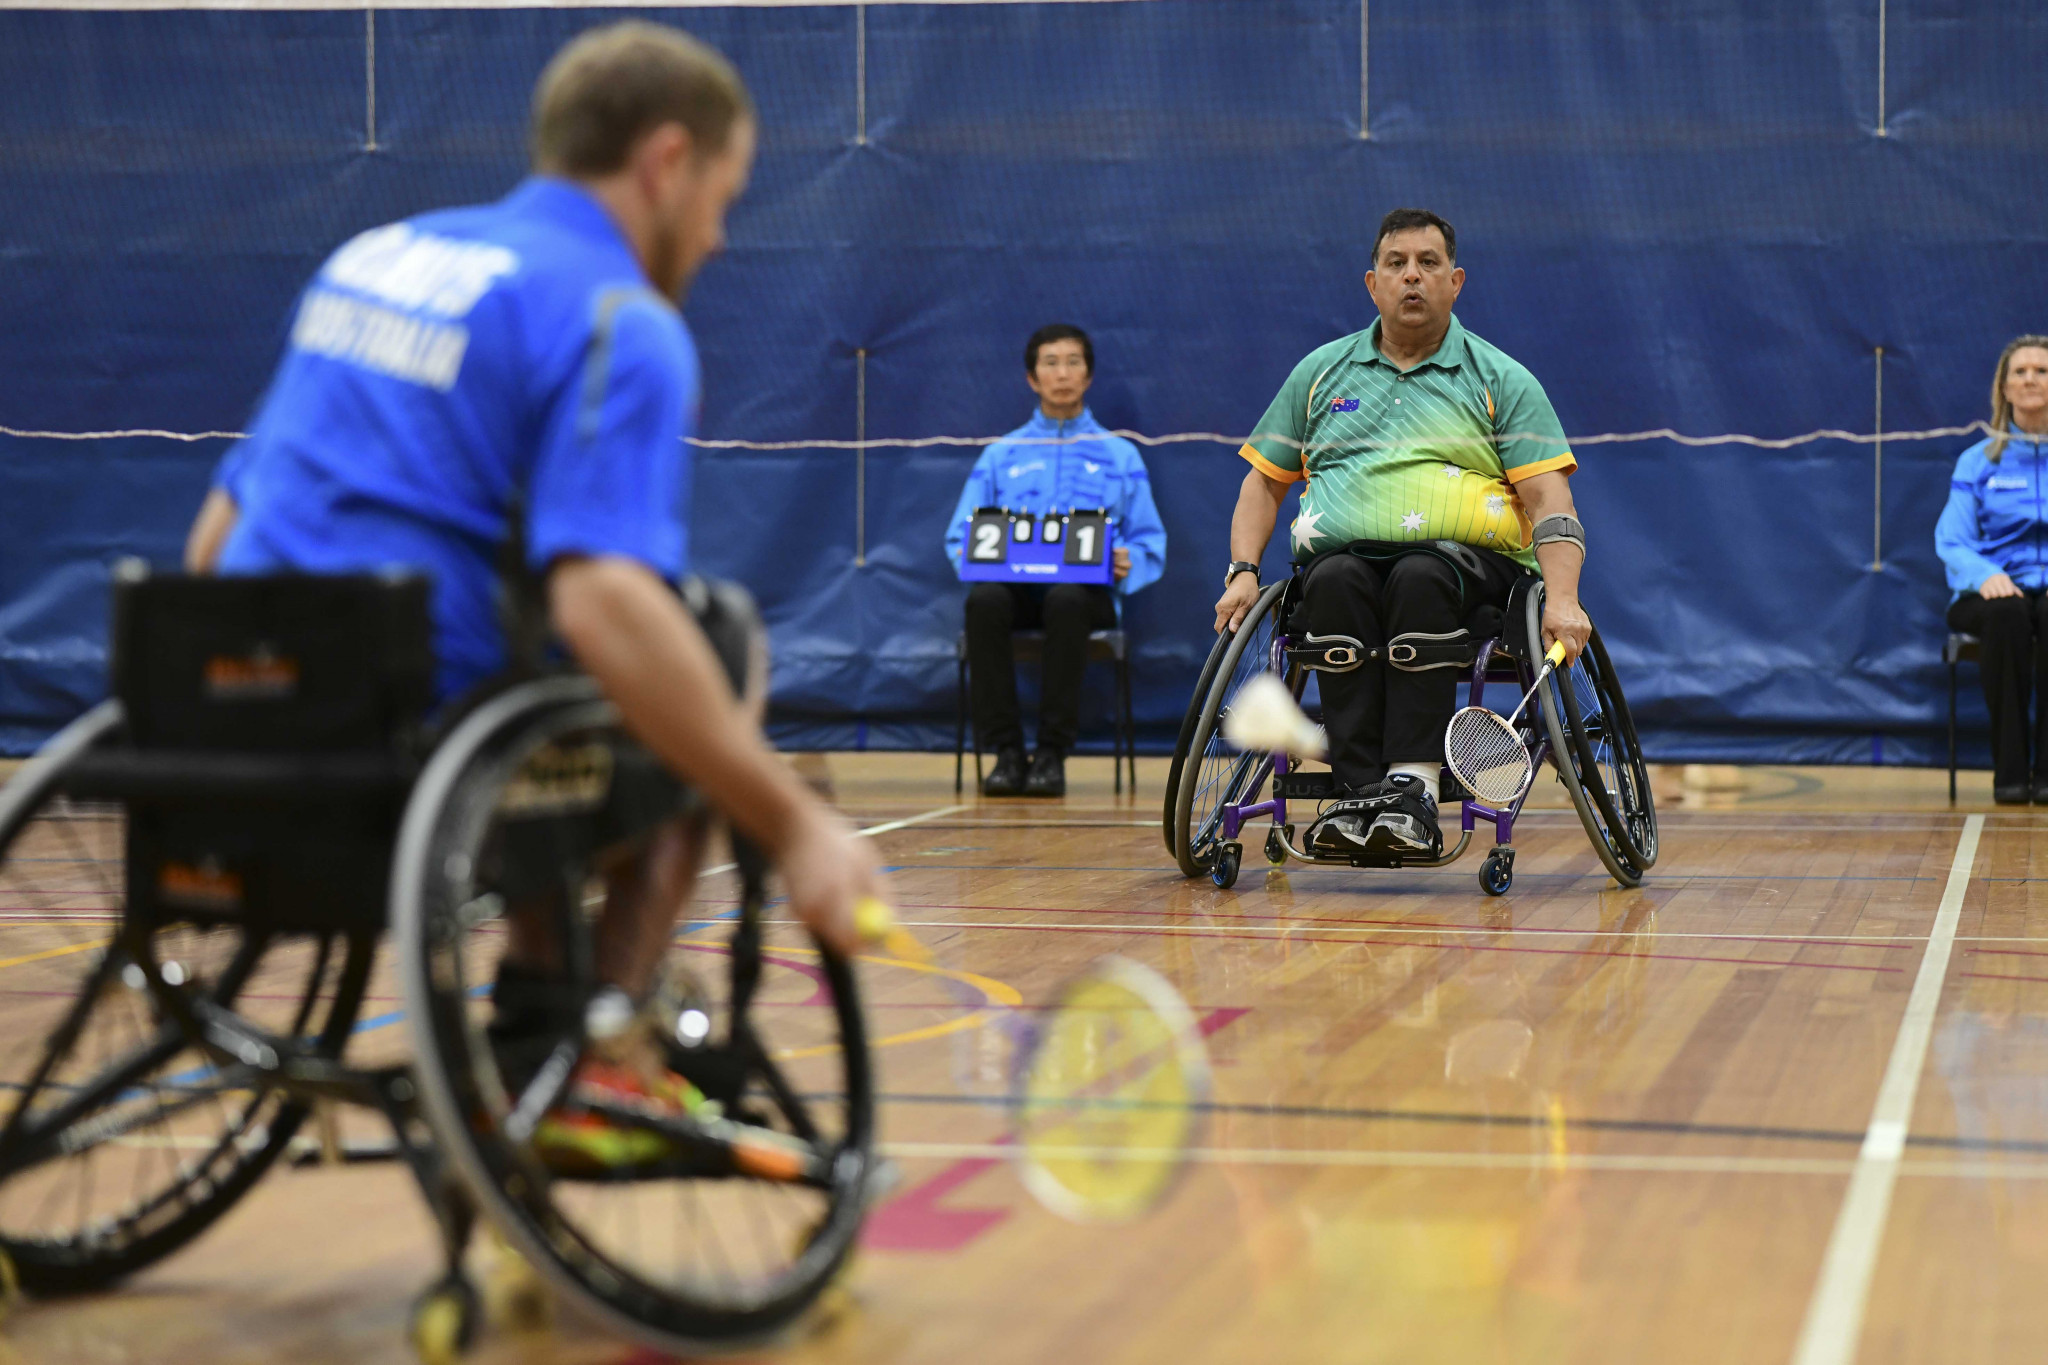 Australia top in all categories after day one of Oceania Para-Badminton Championships